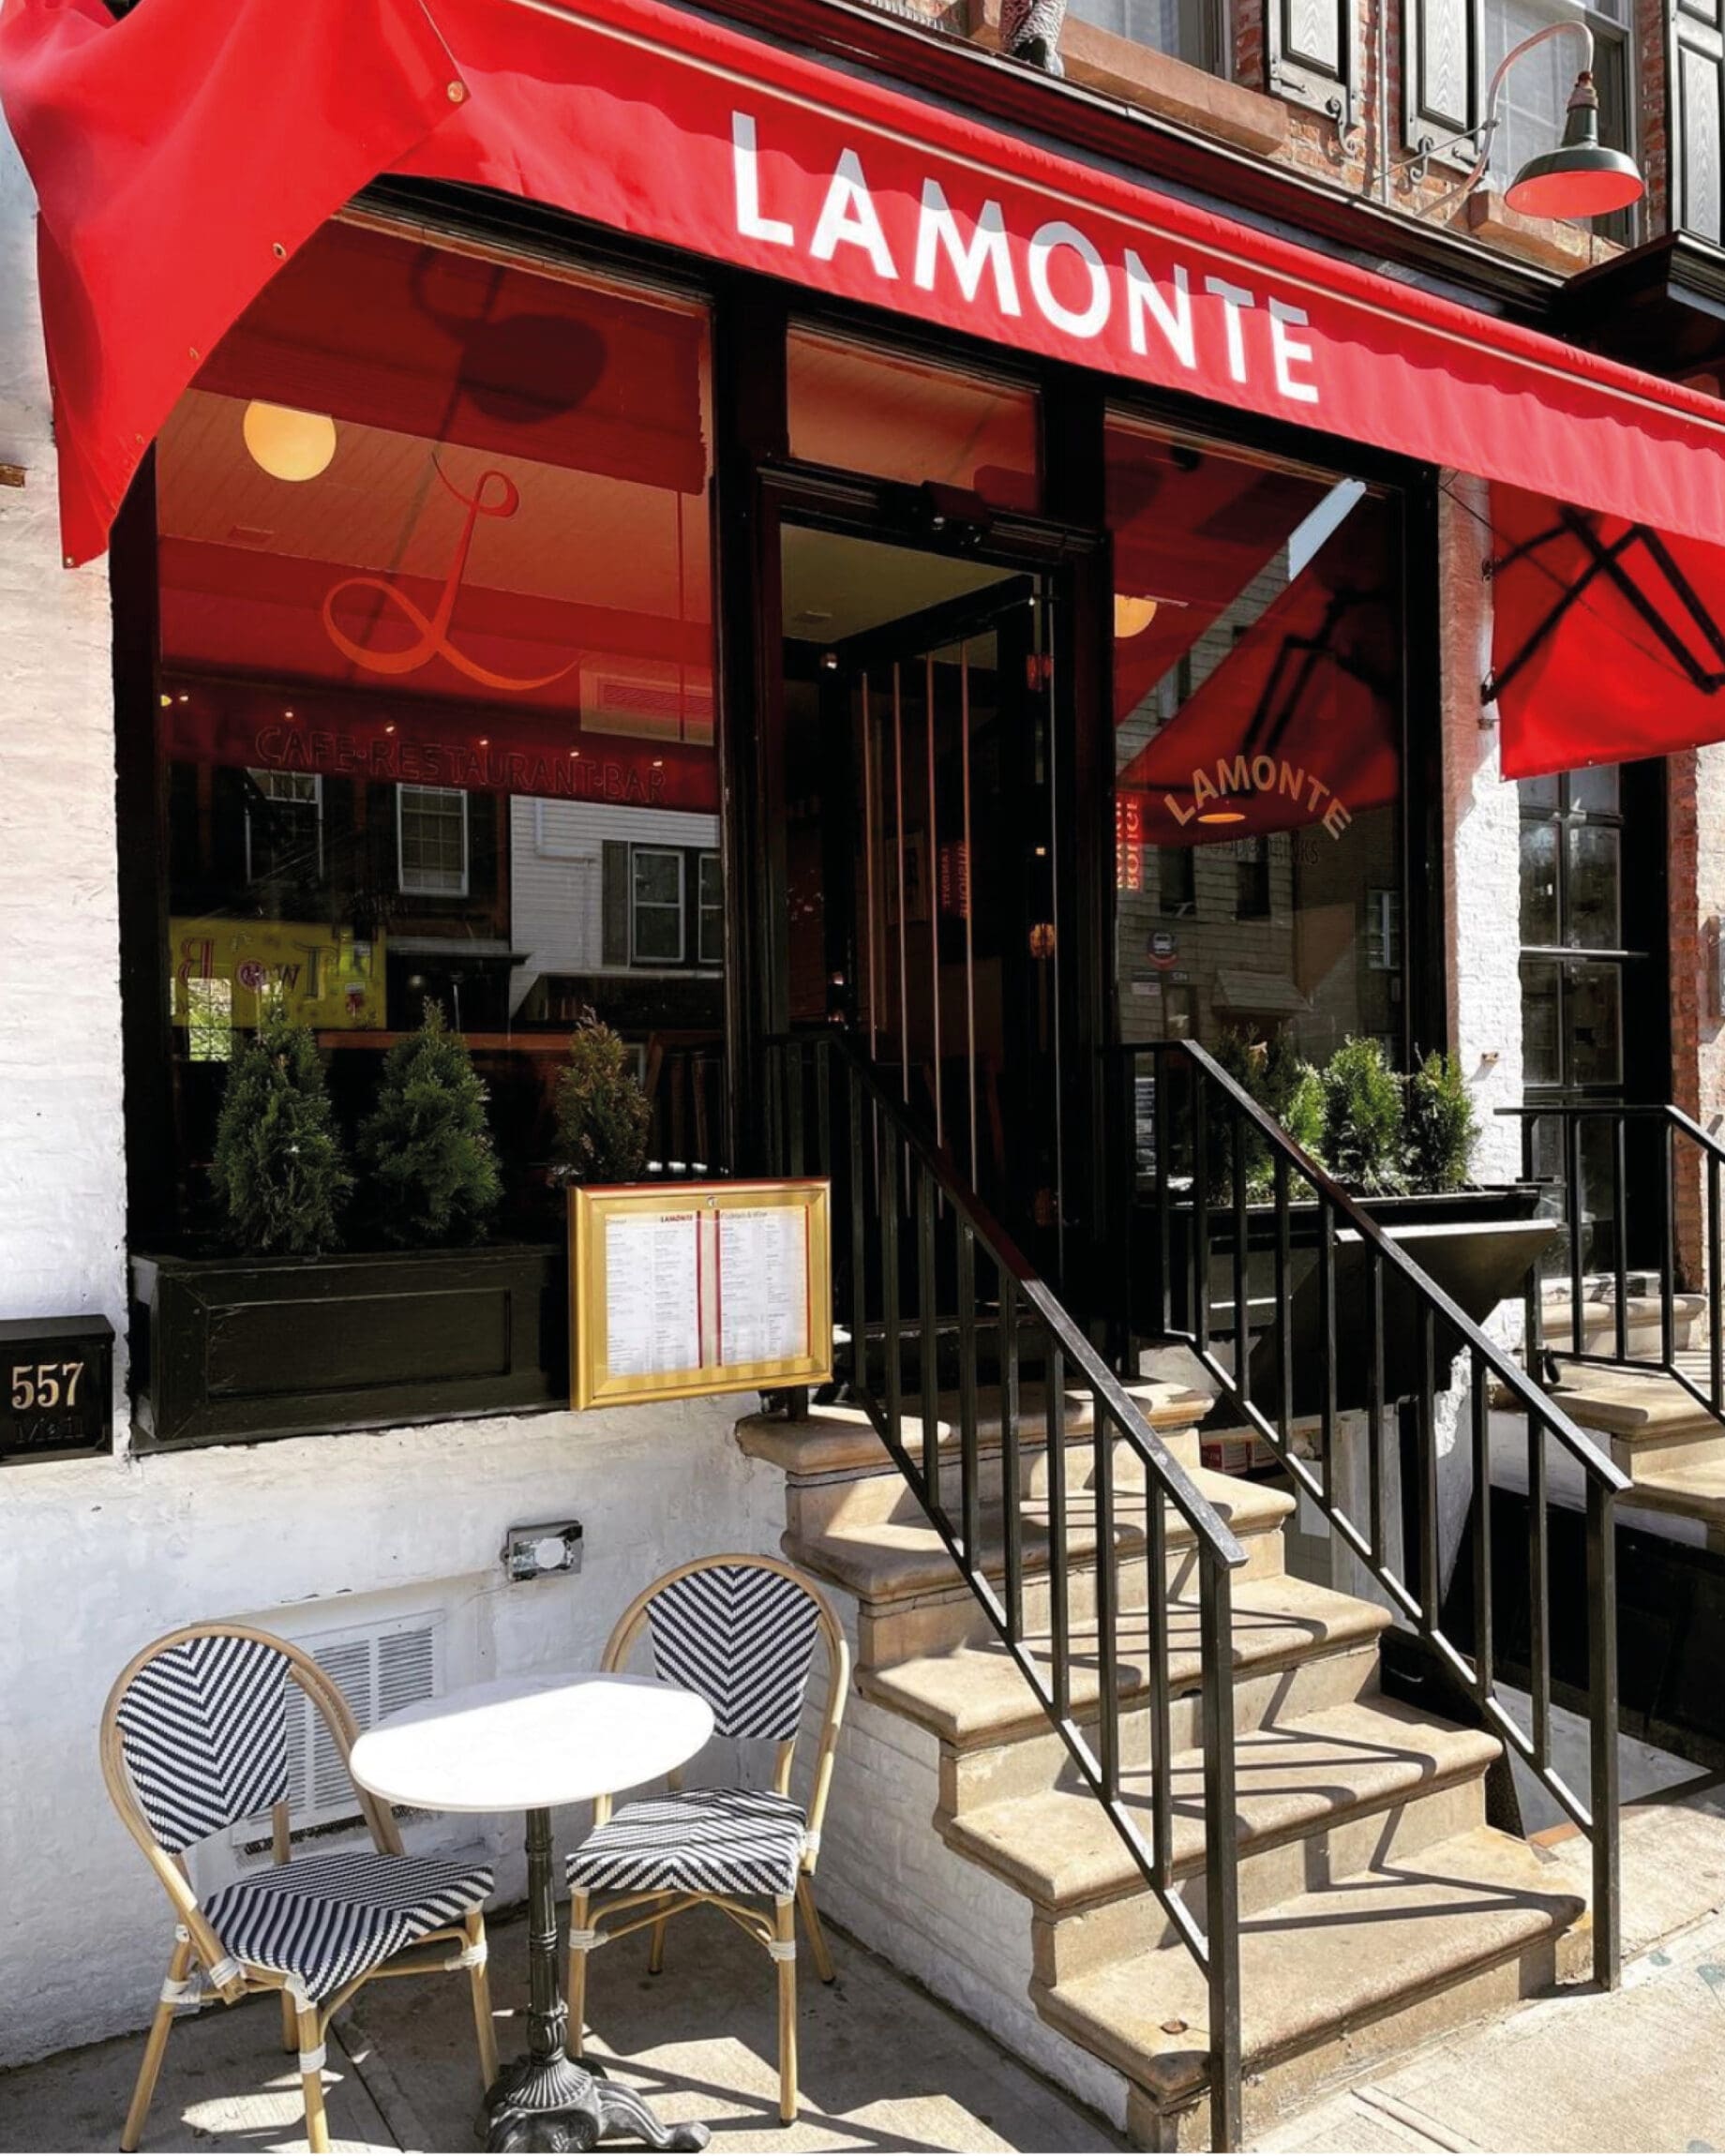 The best restaurants in Williamsburg, NY | The exterior of Lamonte with a red awning